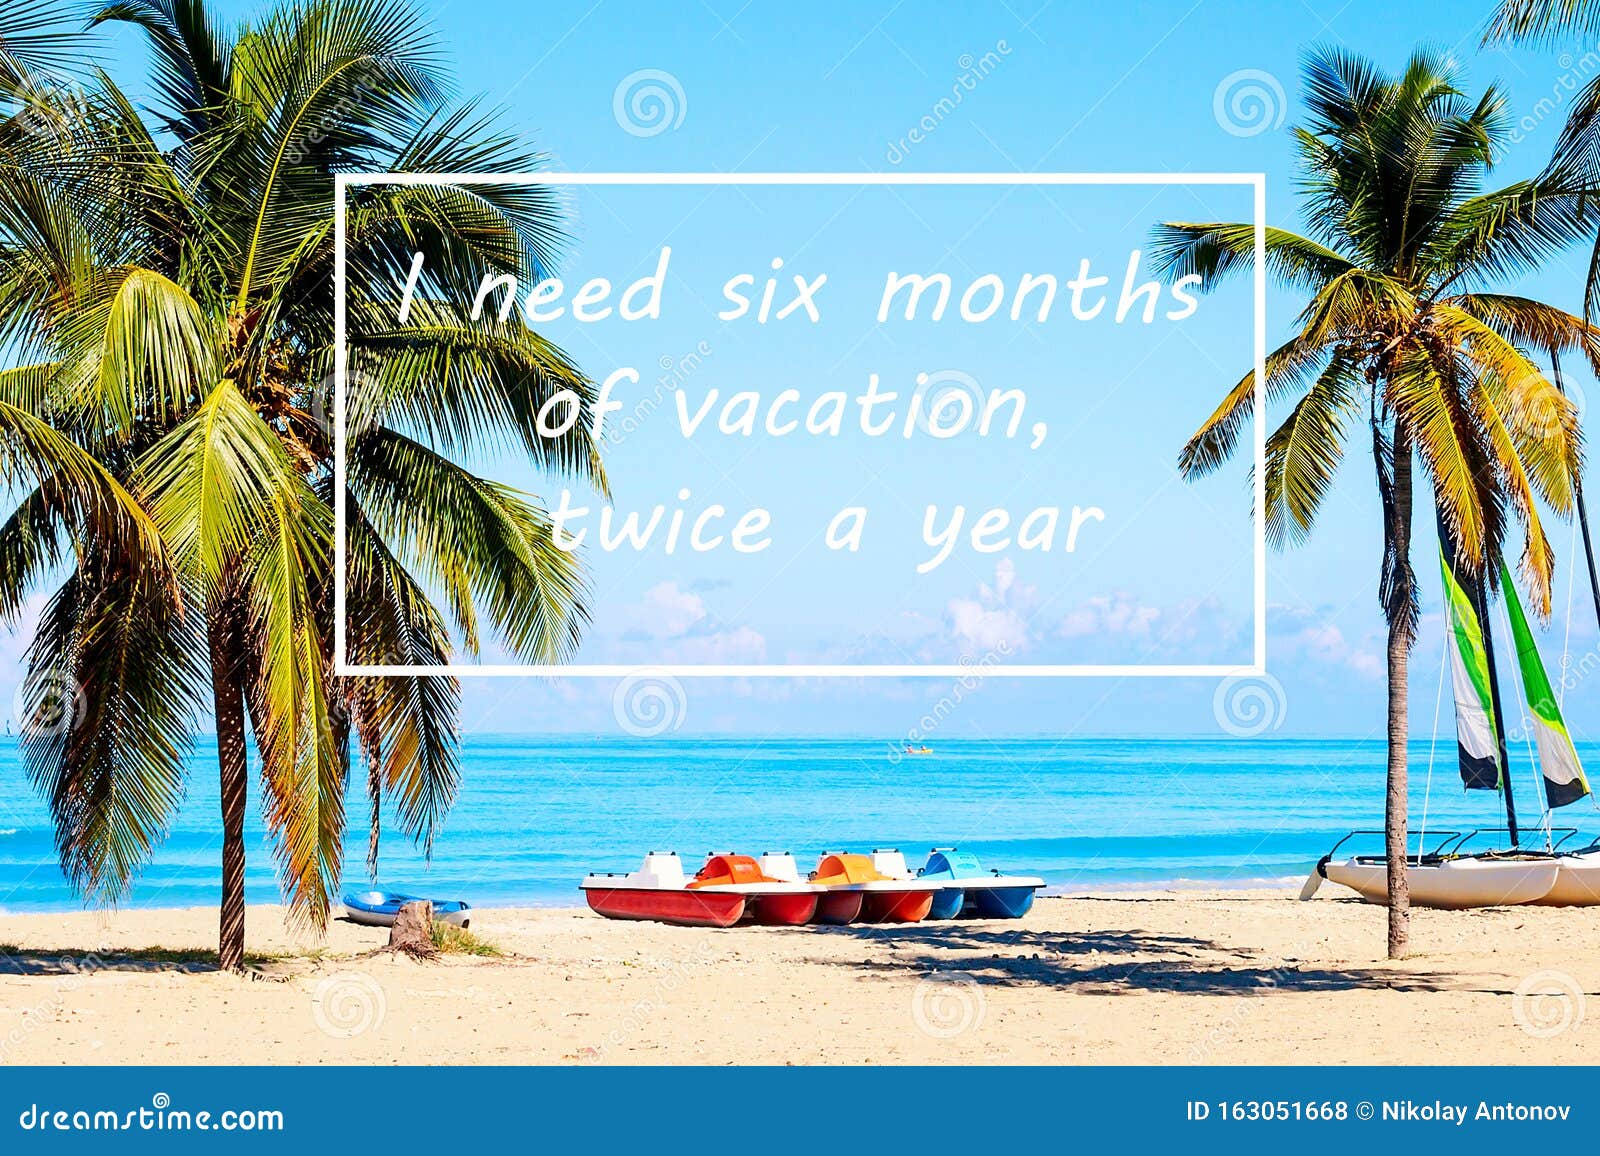 Vacation Holidays Background Wallpaper With Palms And Tropical Beach Vacation Quote I Need A Six Month Vacation Twice A Year Stock Photo Image Of Dominicana Motivation 163051668